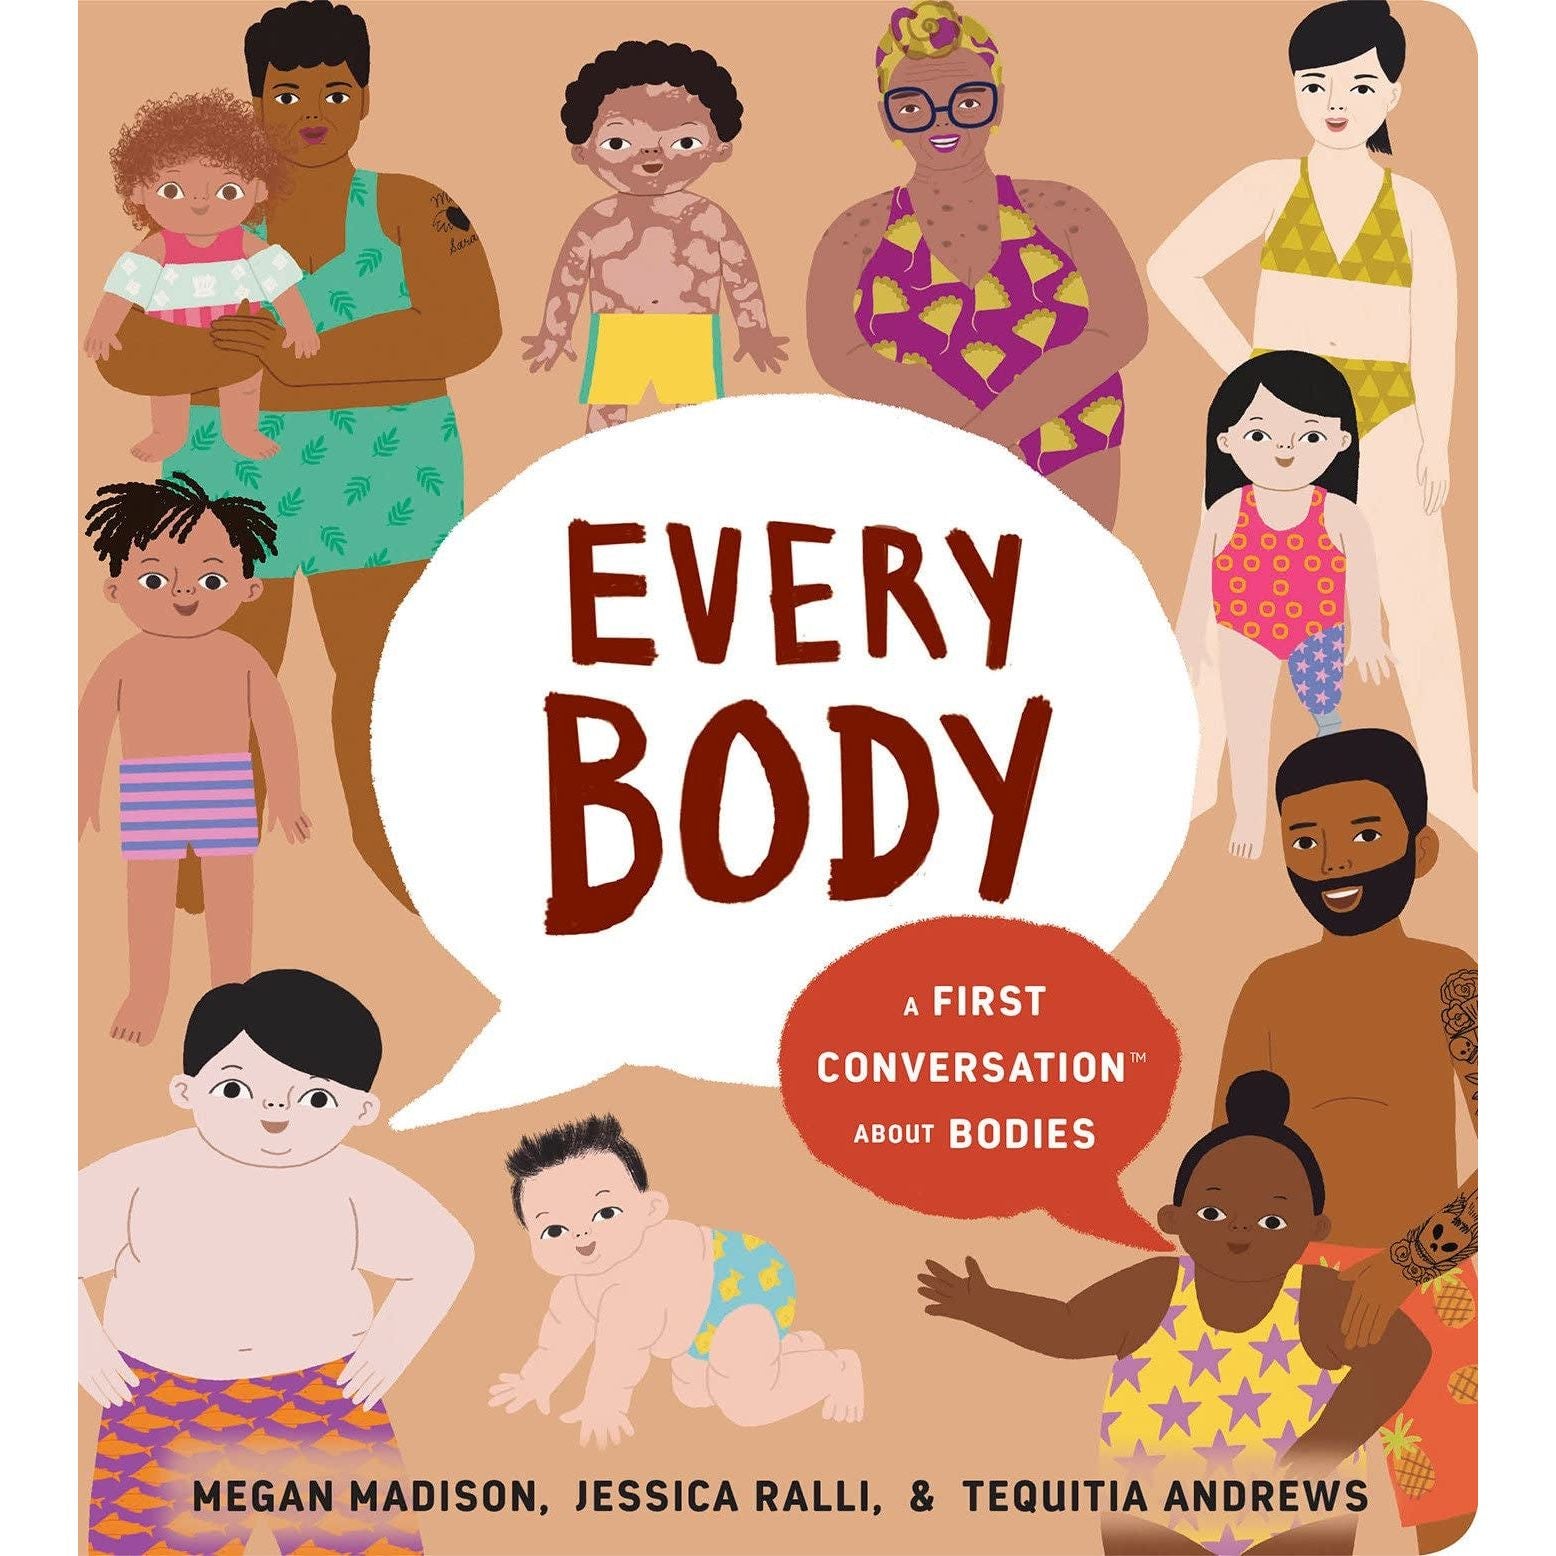 Every Body - A First Conversation About Bodies